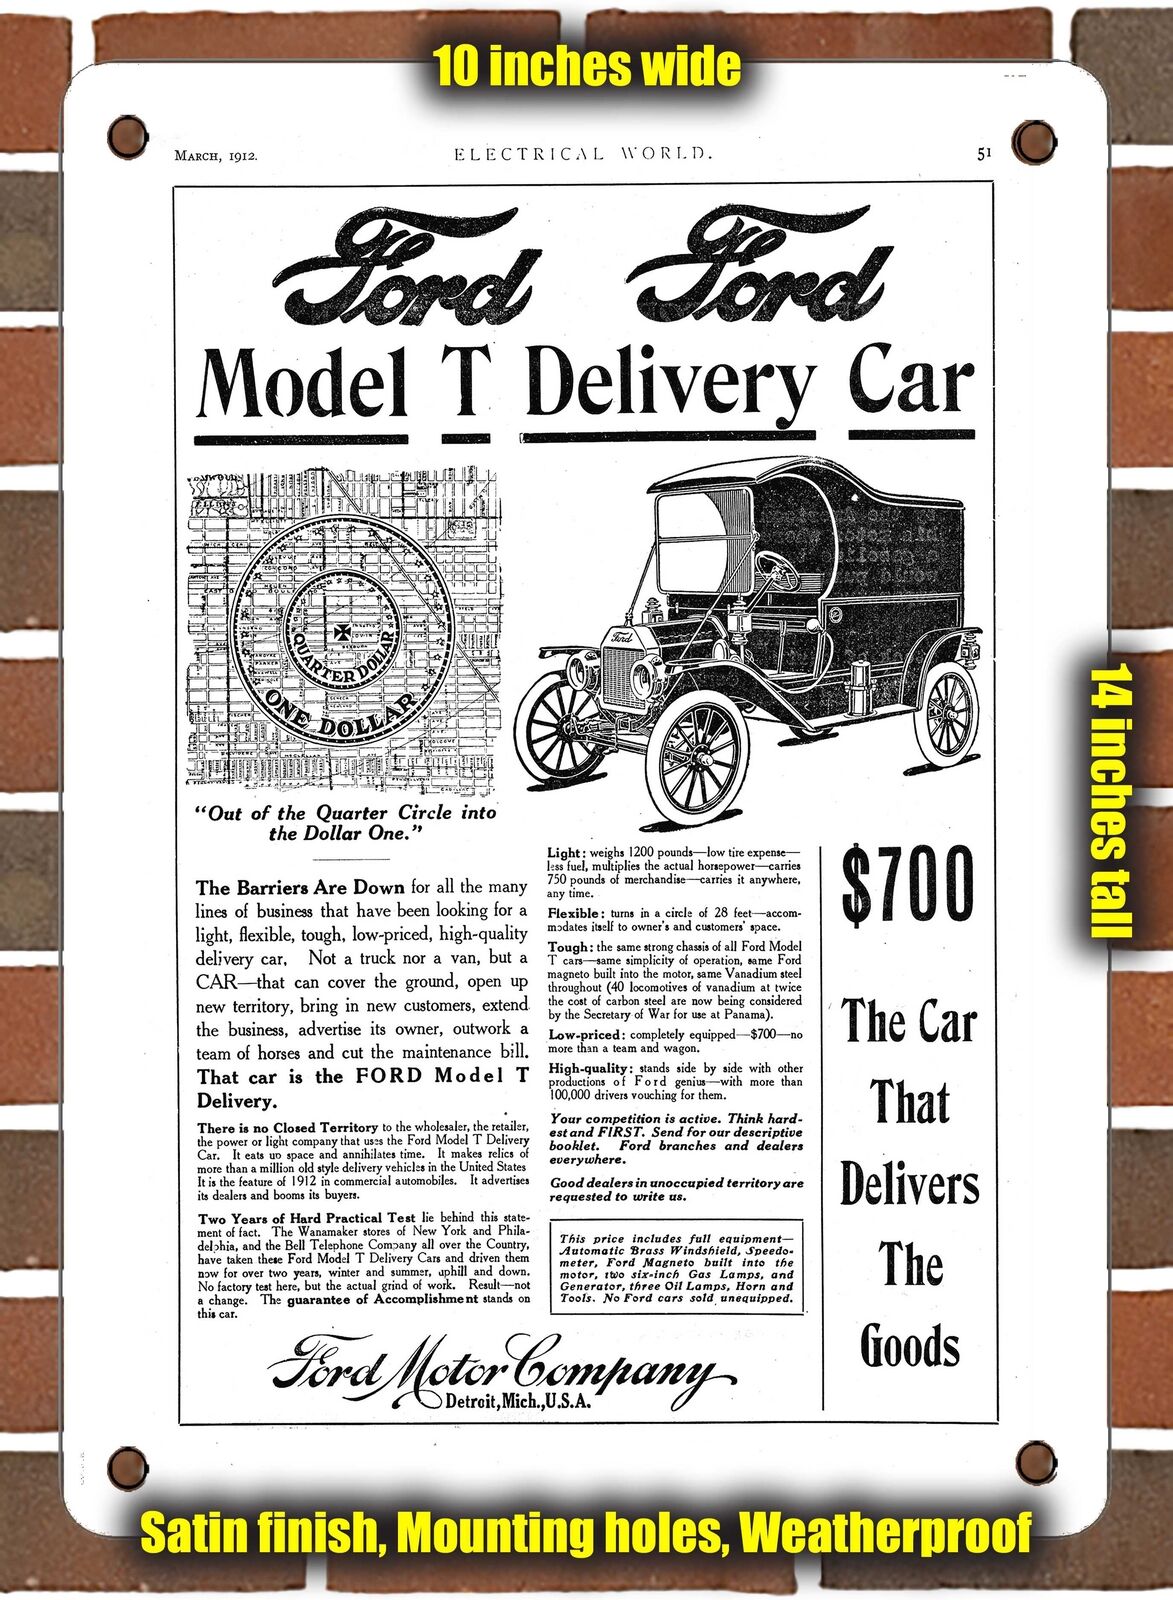 METAL SIGN - 1912 Model T Delivery Car - 10x14 Inches